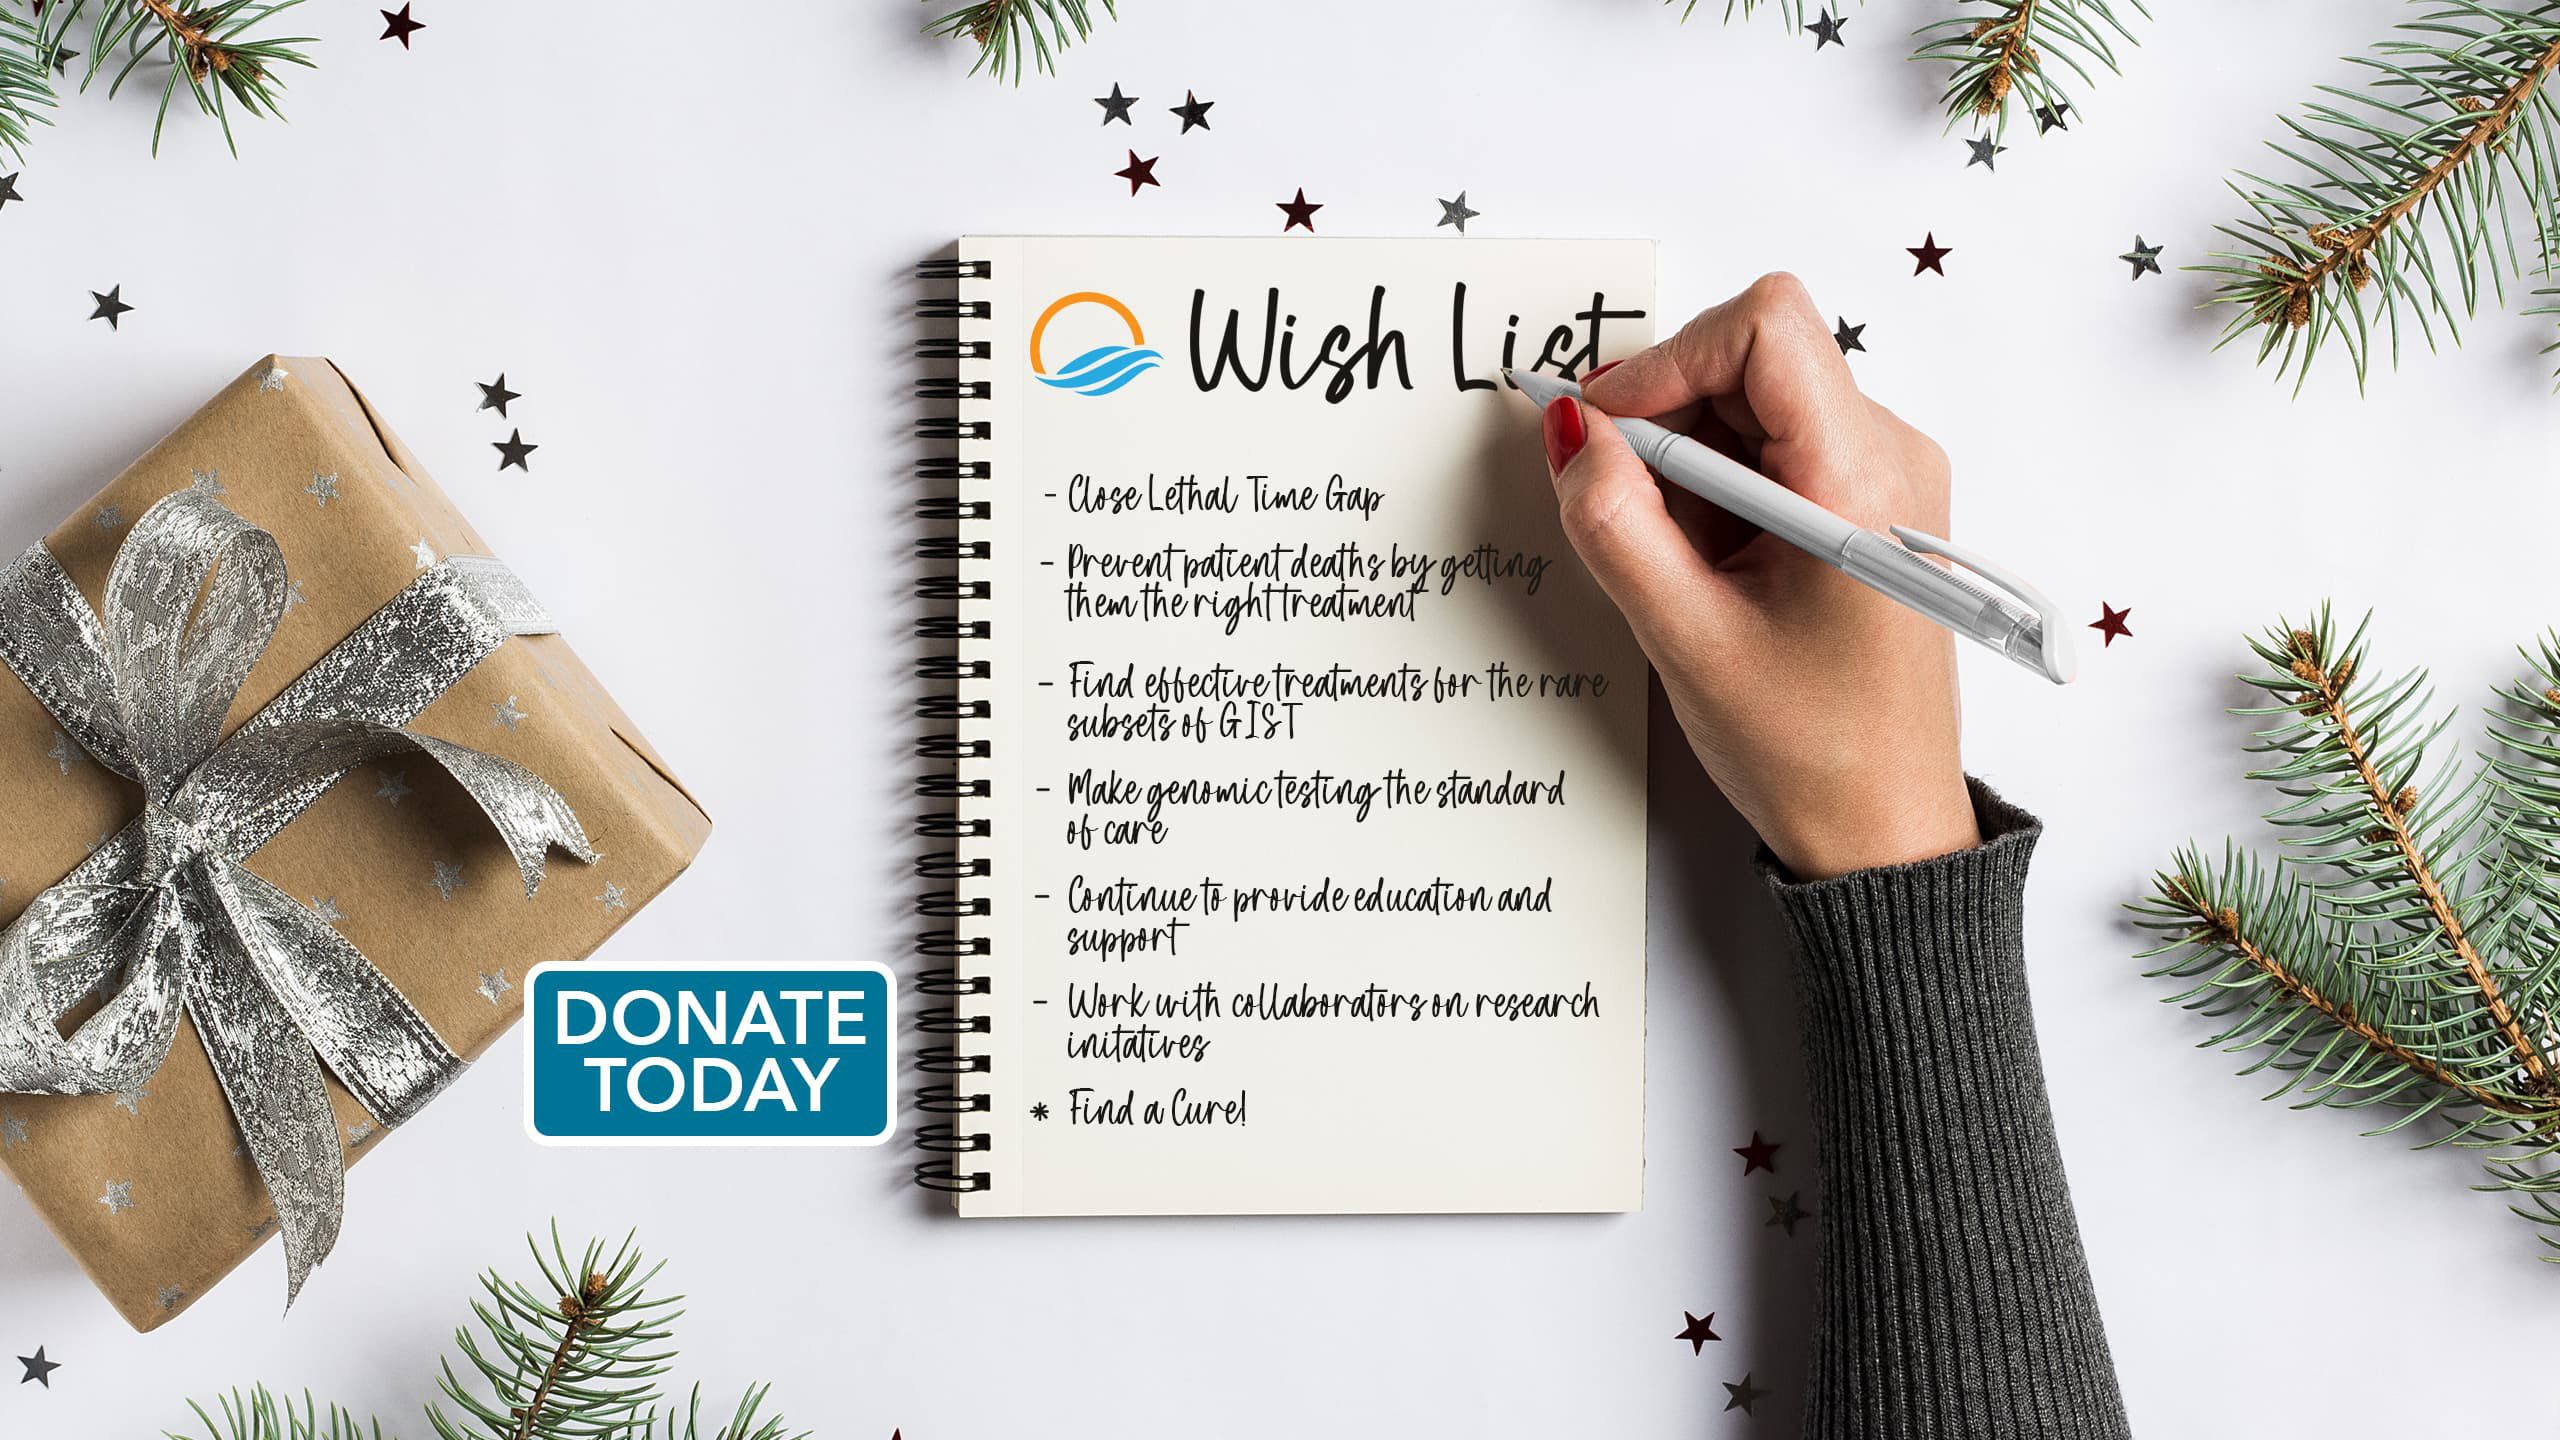 Wish List Holiday Campaign 2021